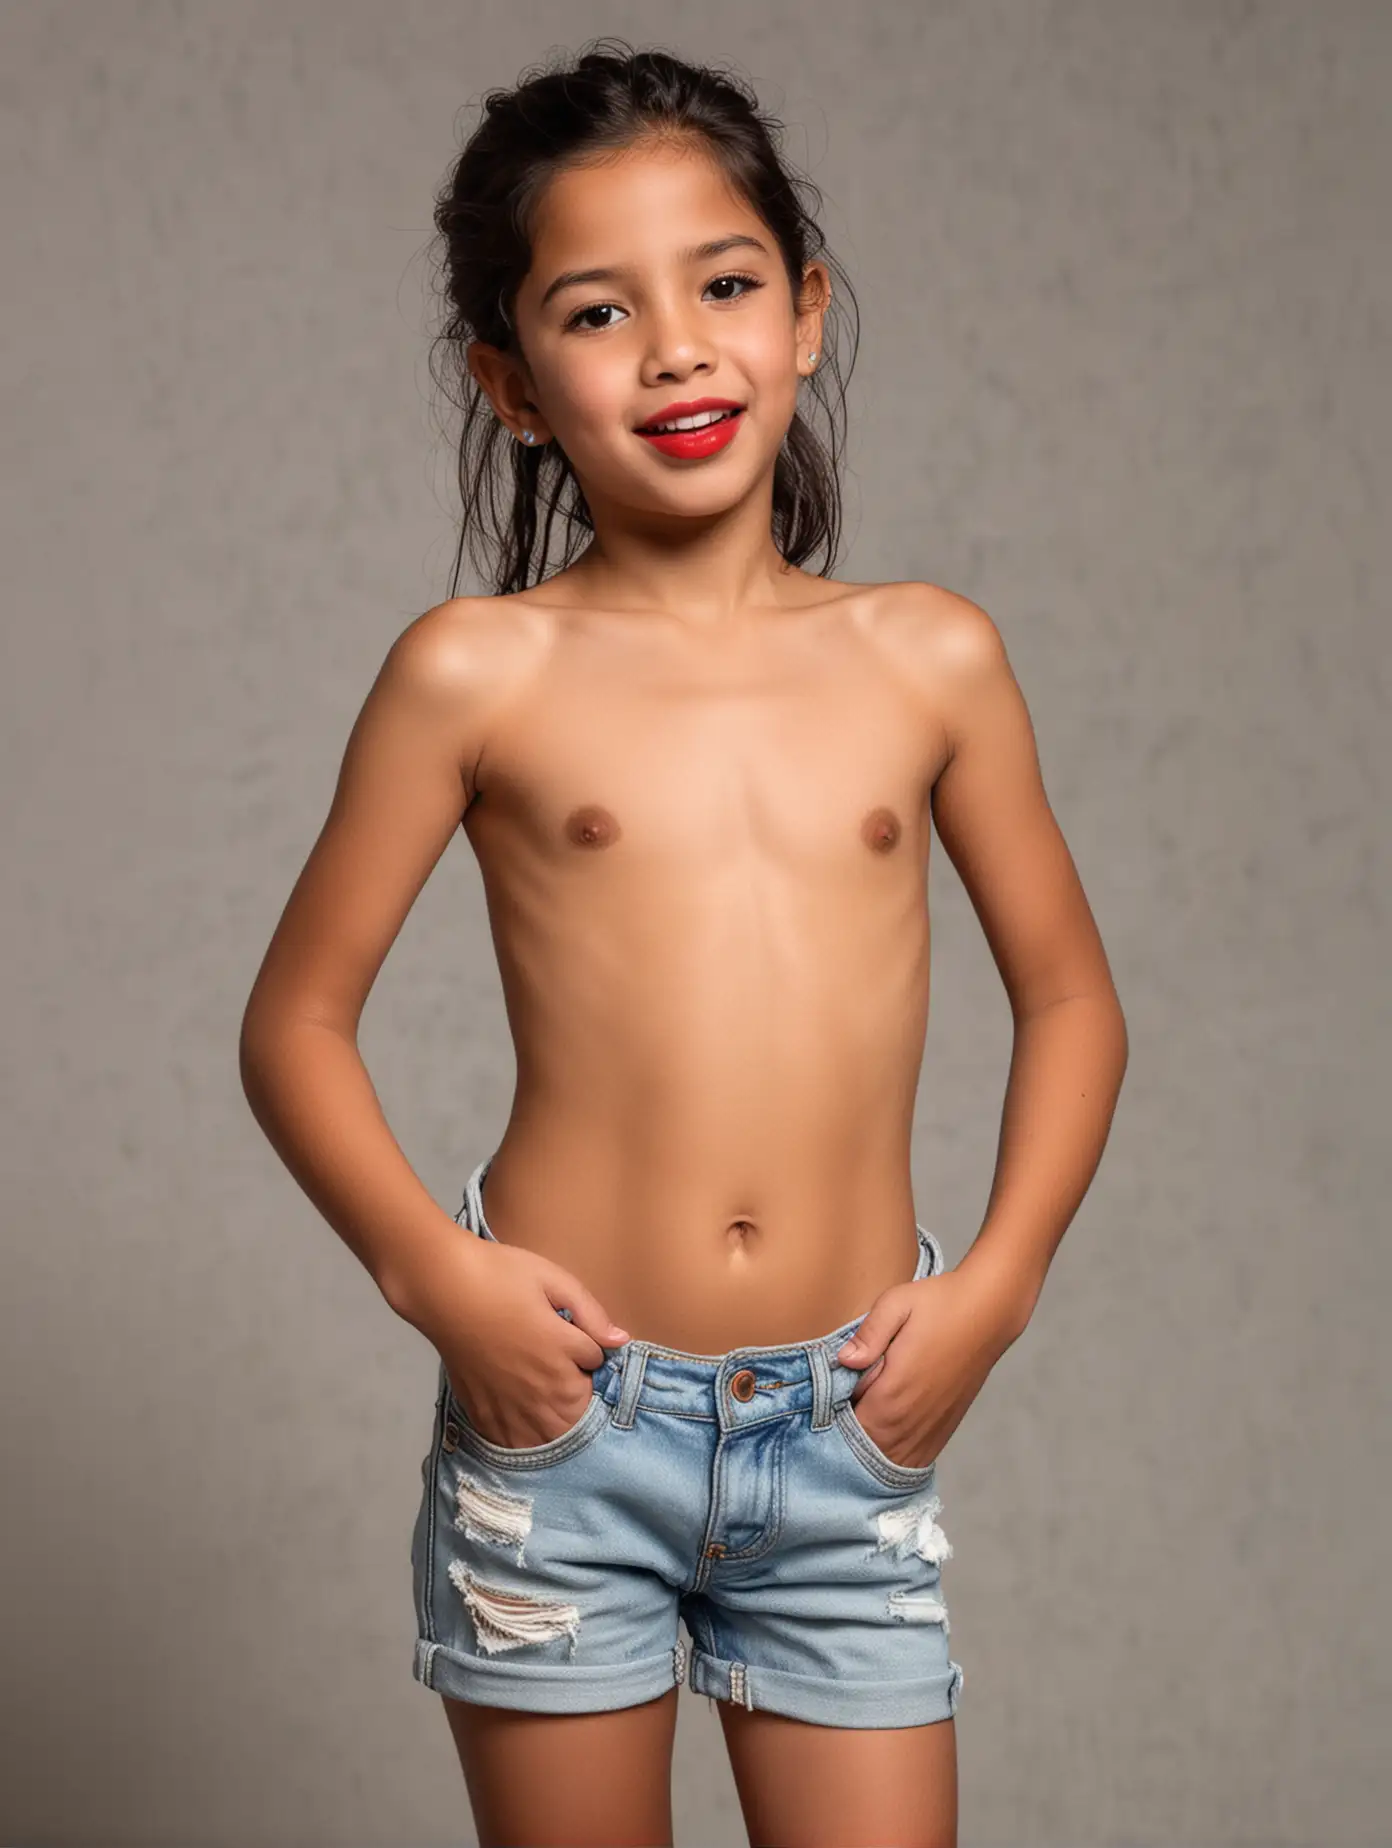 Sexy, topless, red lipstick, skinny, ten year old Latina girl    hands in pockets.